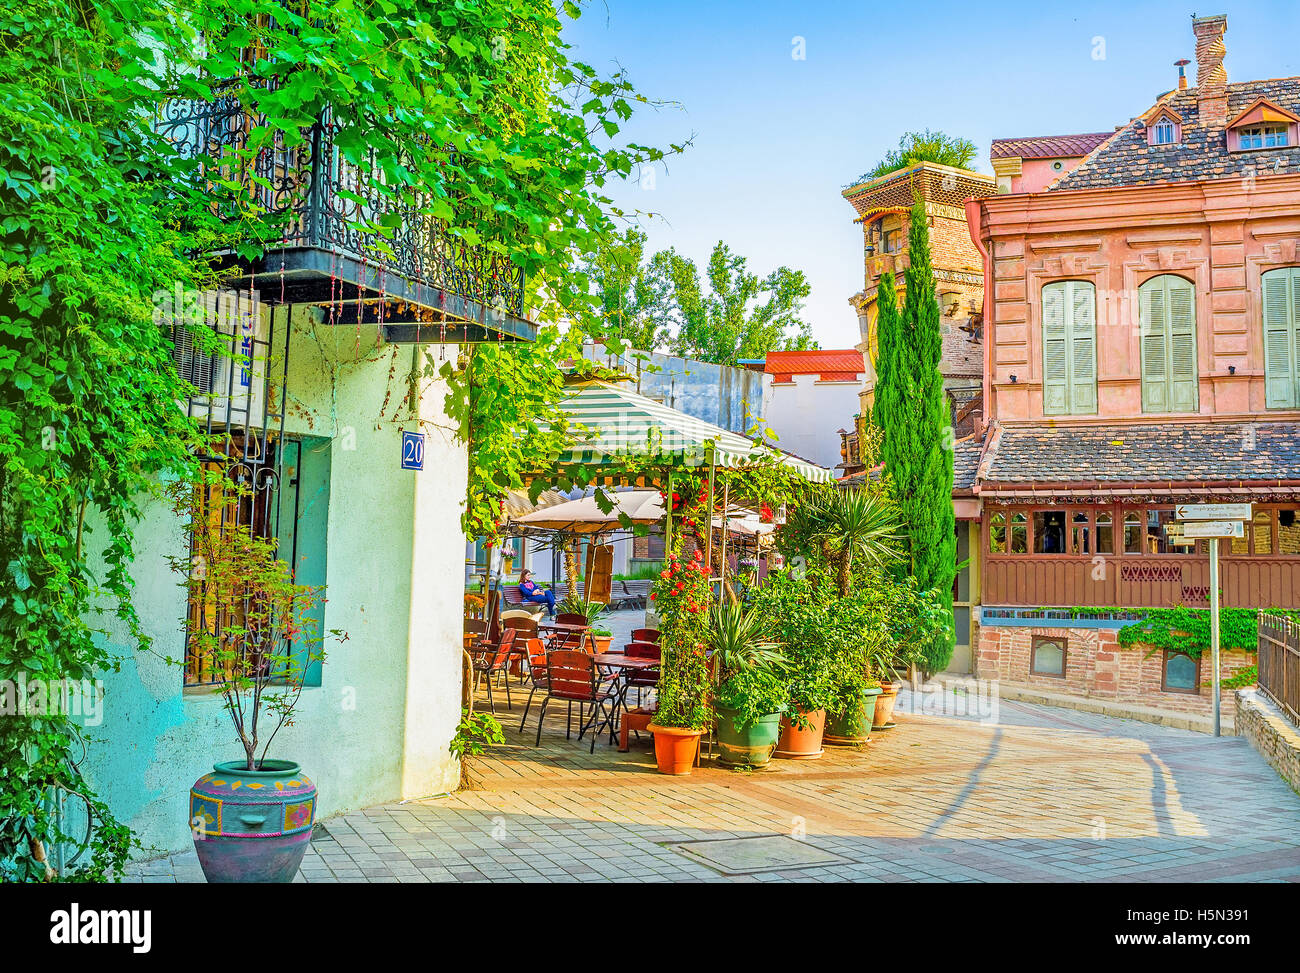 The summer terraces of Shavteli street cafes, decorated with numerous plants in pots, Tbilisi Georgia Stock Photo